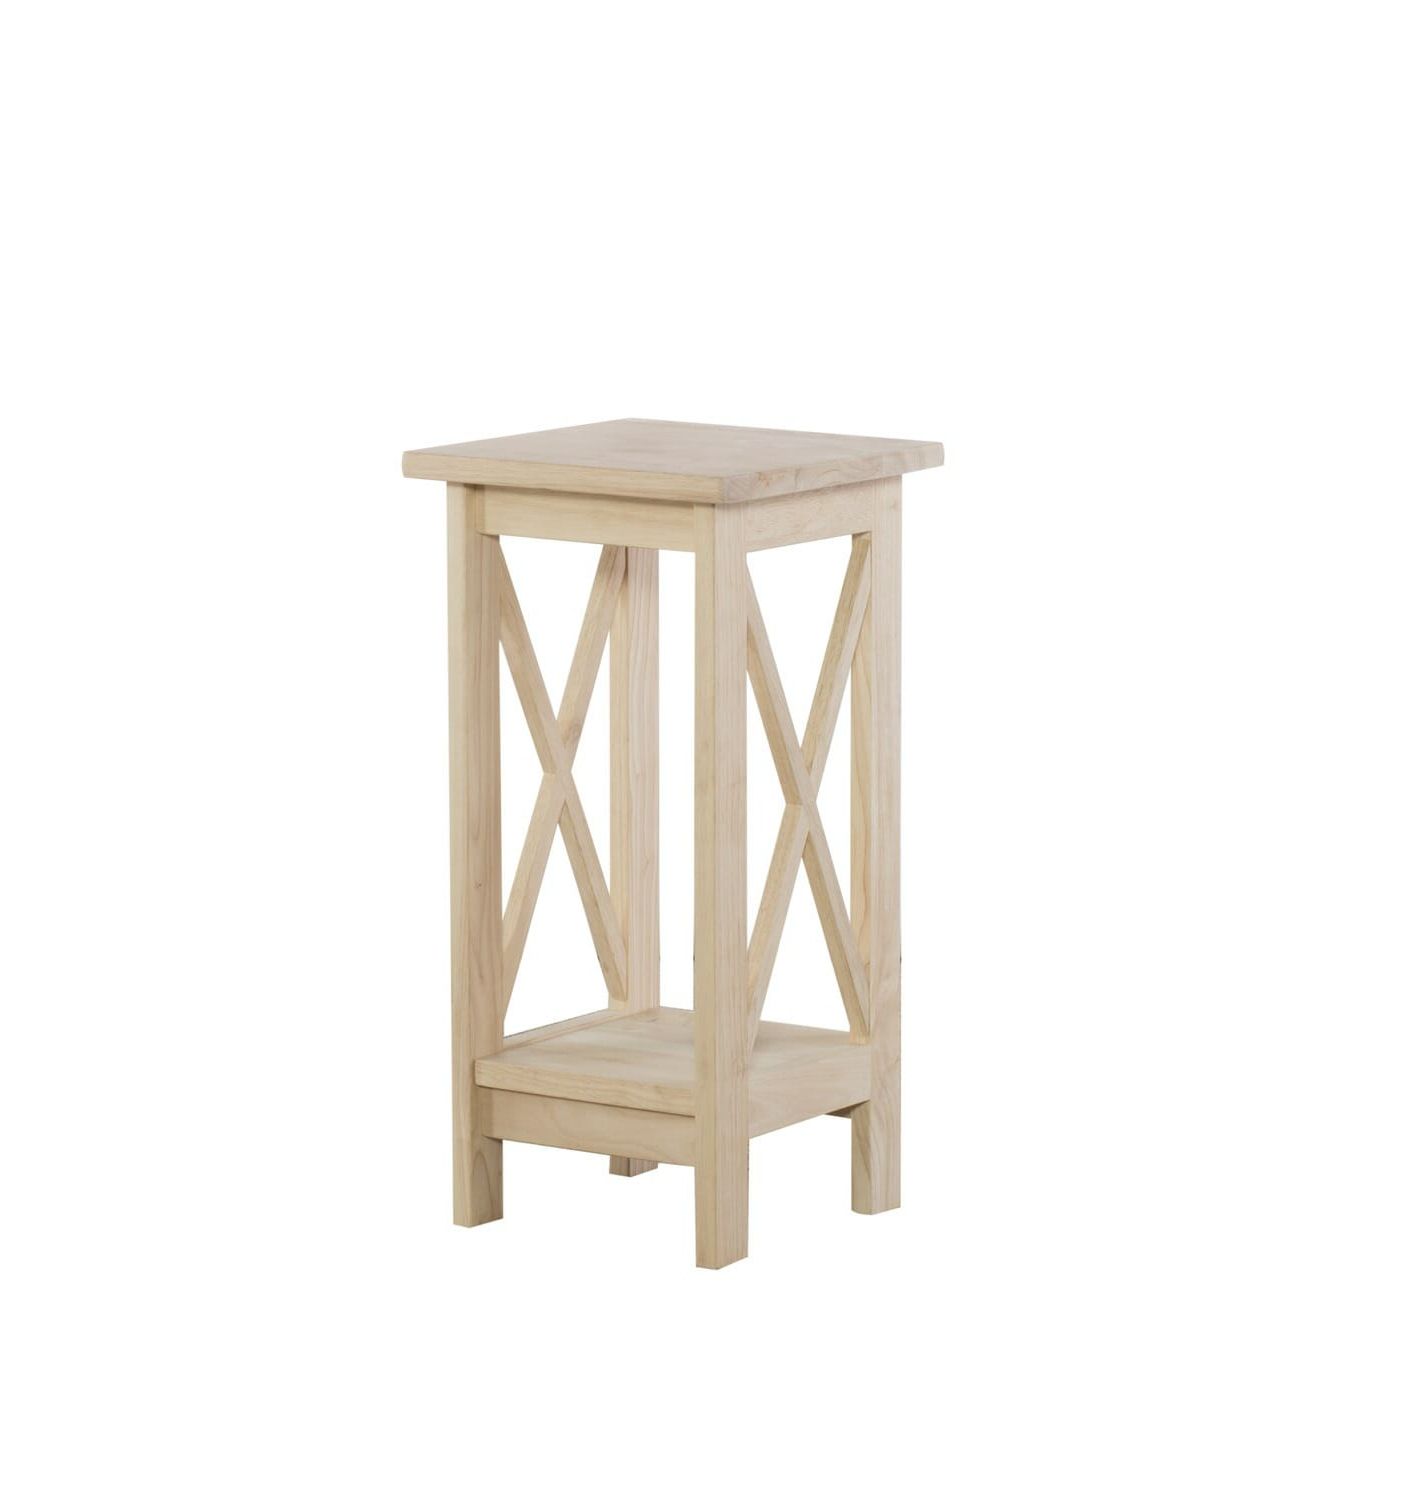 3071x 24 Inch Tall X Sided Plant Stand (View 4 of 10)